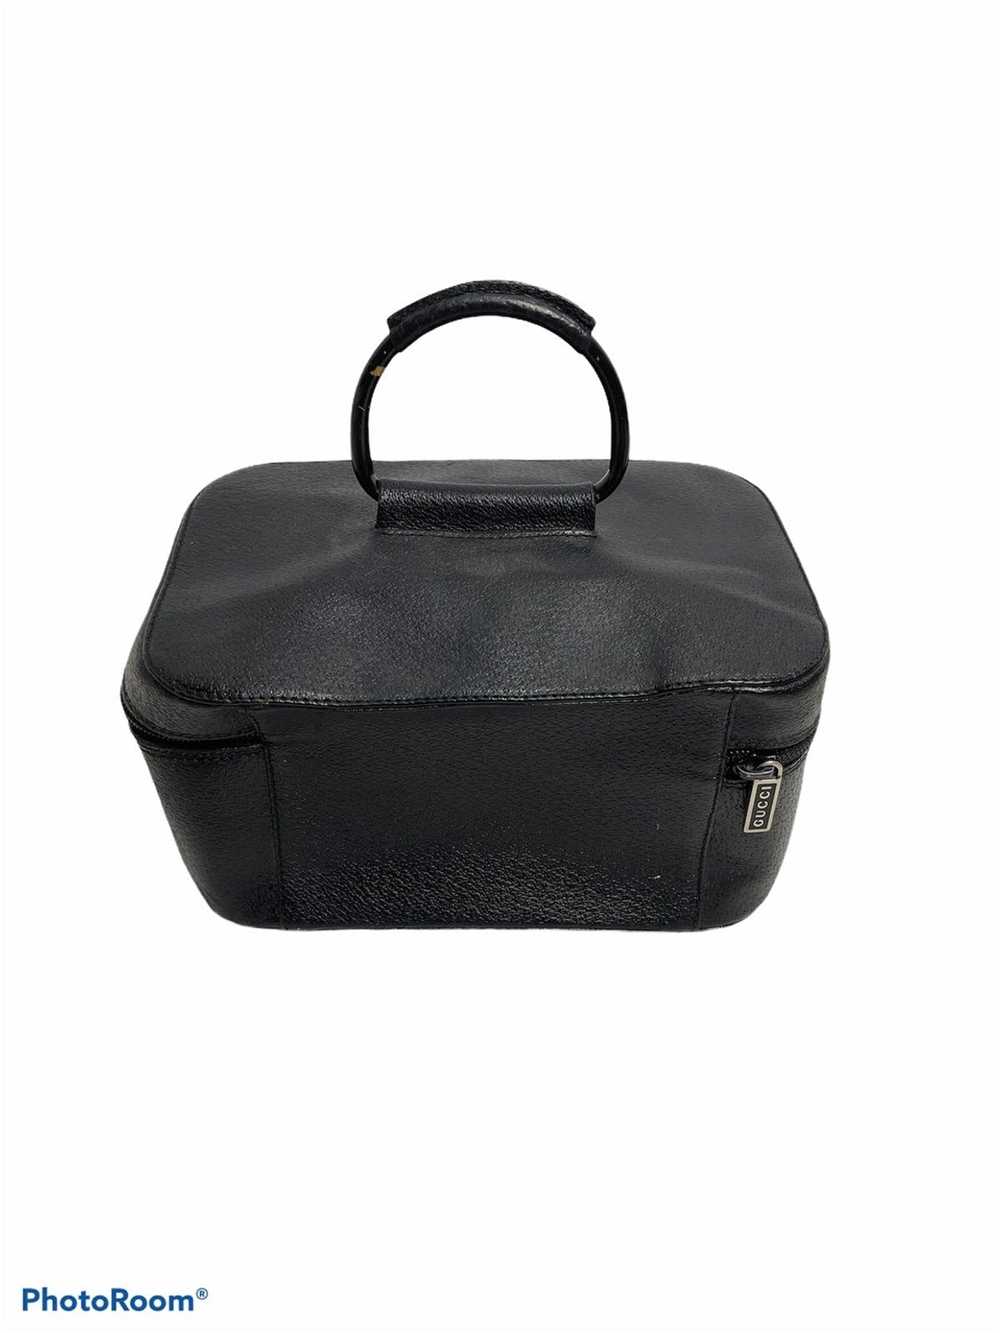 Gucci Authentic Vintage Gucci Black Cosmetic Bag - image 4